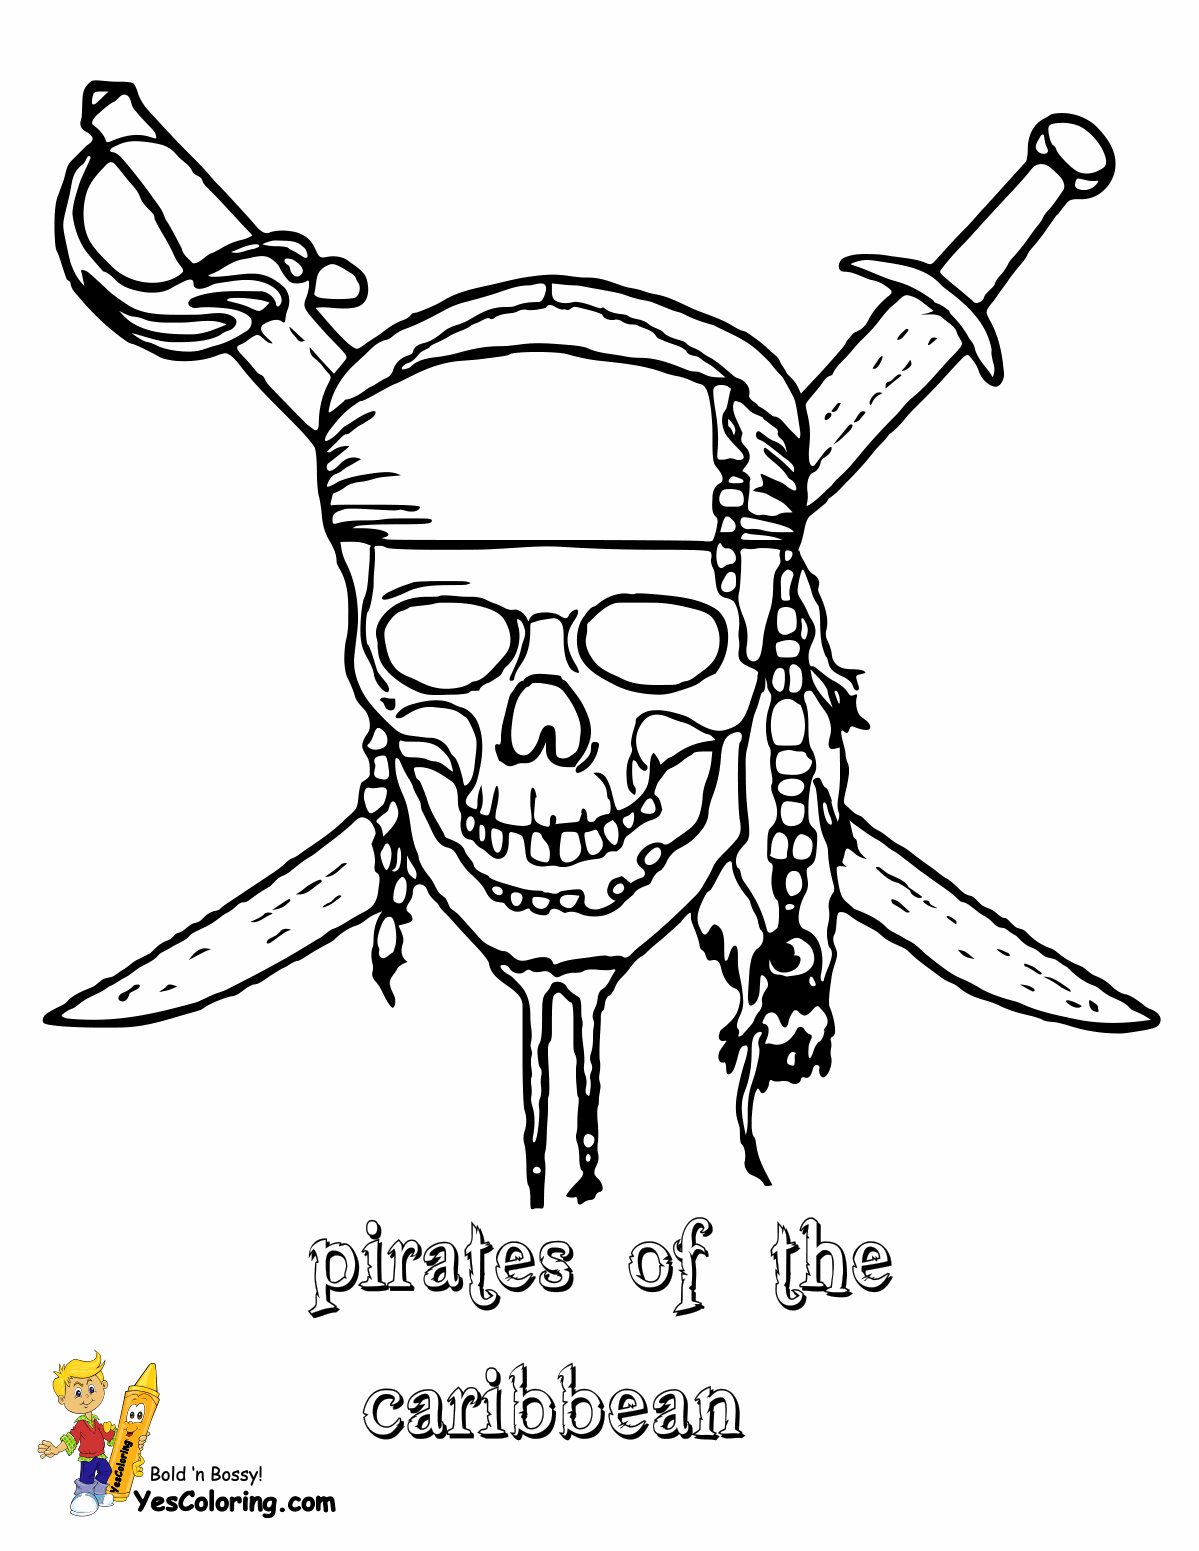 pirates of the caribbean pictures to print pirates of caribbean coloring pages coloring pages to to pirates pictures print of the caribbean 